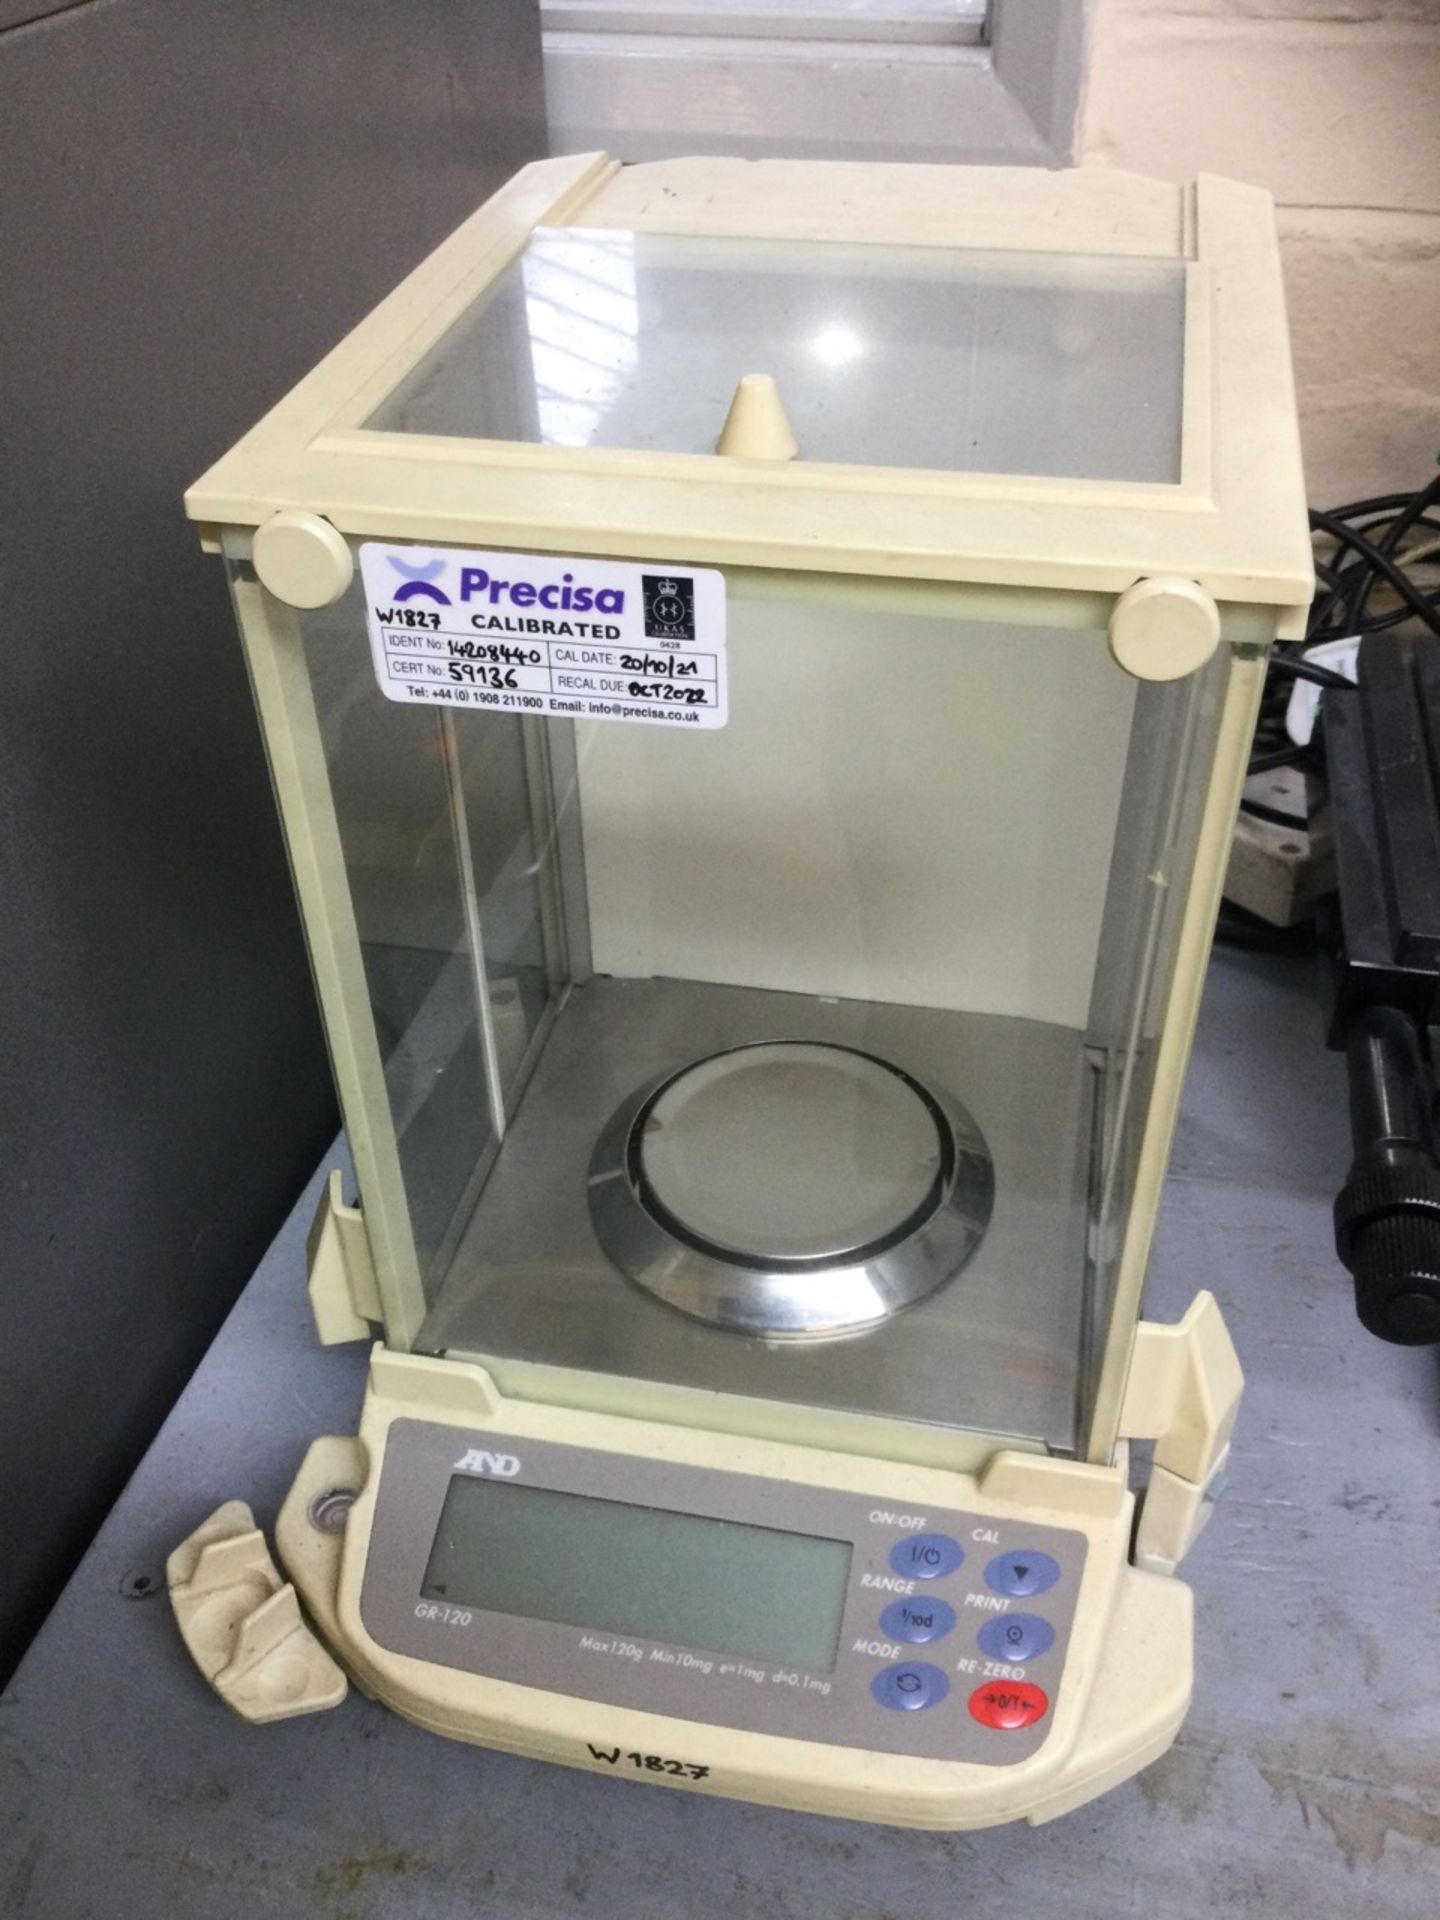 1 AND, GR-120-EC, Analytical Balance, Serial Numbe